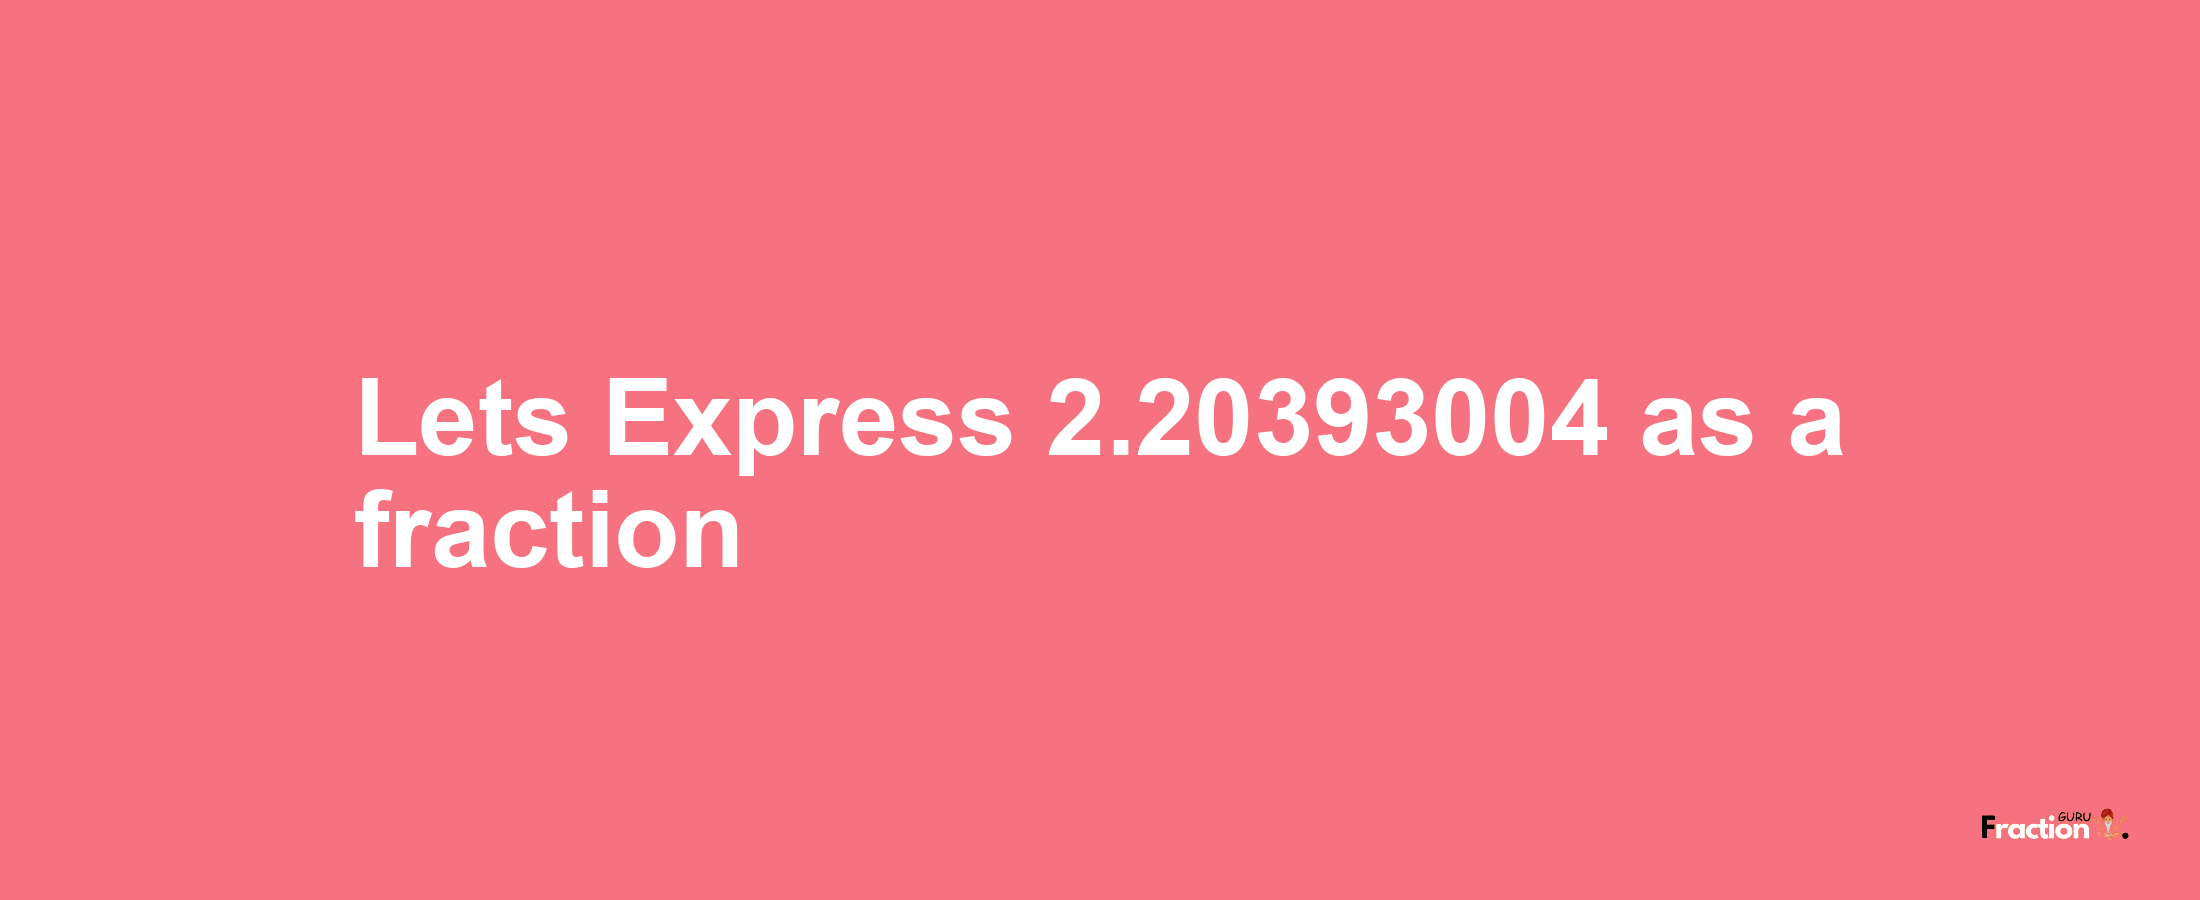 Lets Express 2.20393004 as afraction